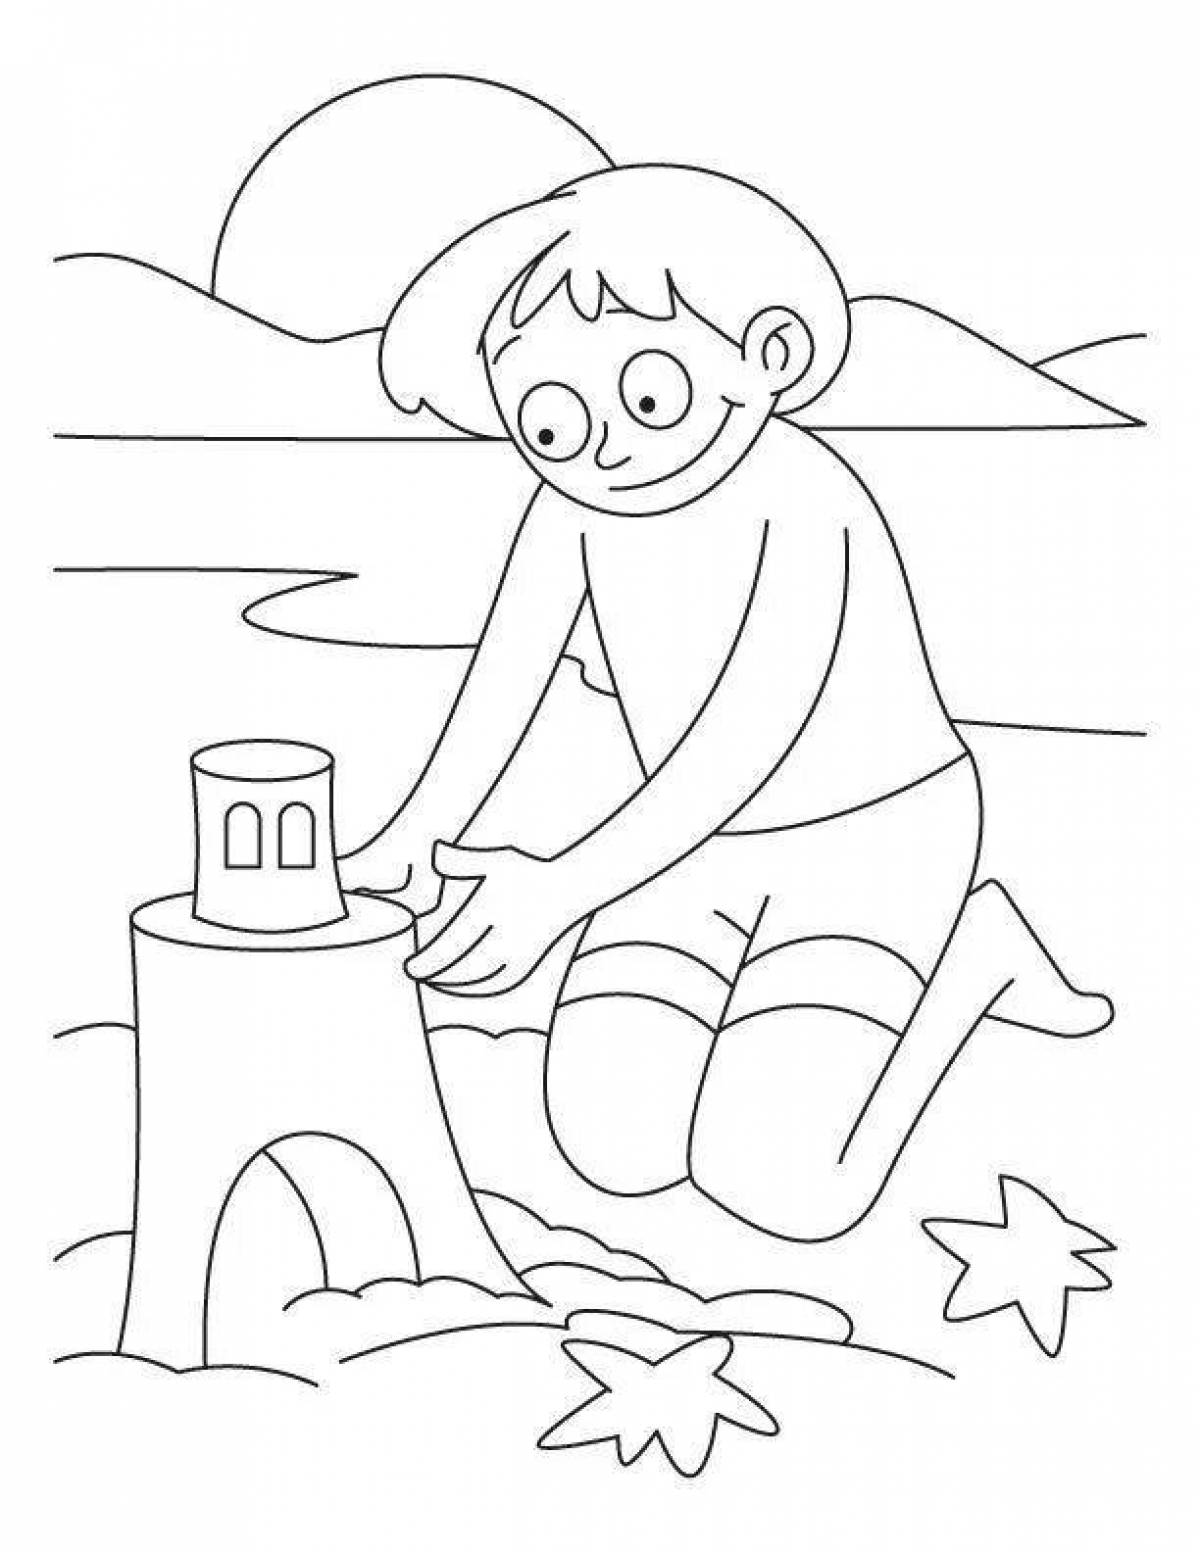 Soft sand coloring page